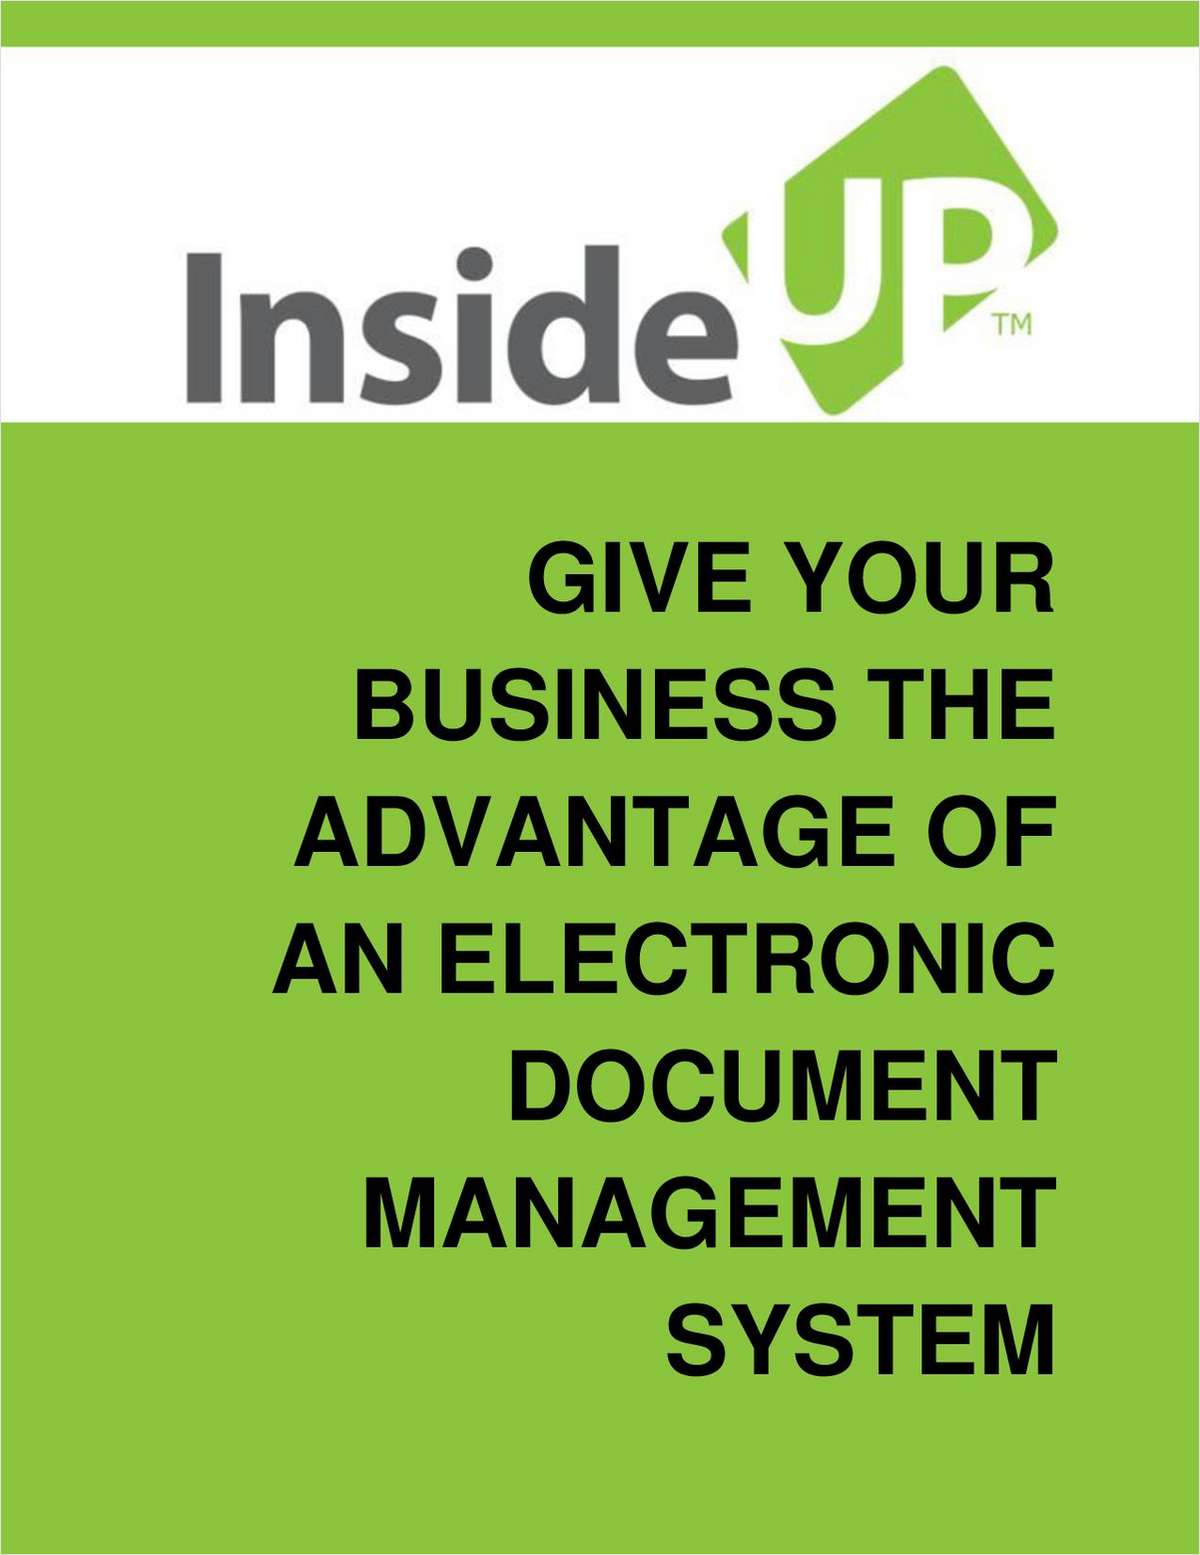 How Electronic Document Management Systems Can Increase Business Productivity By 20%